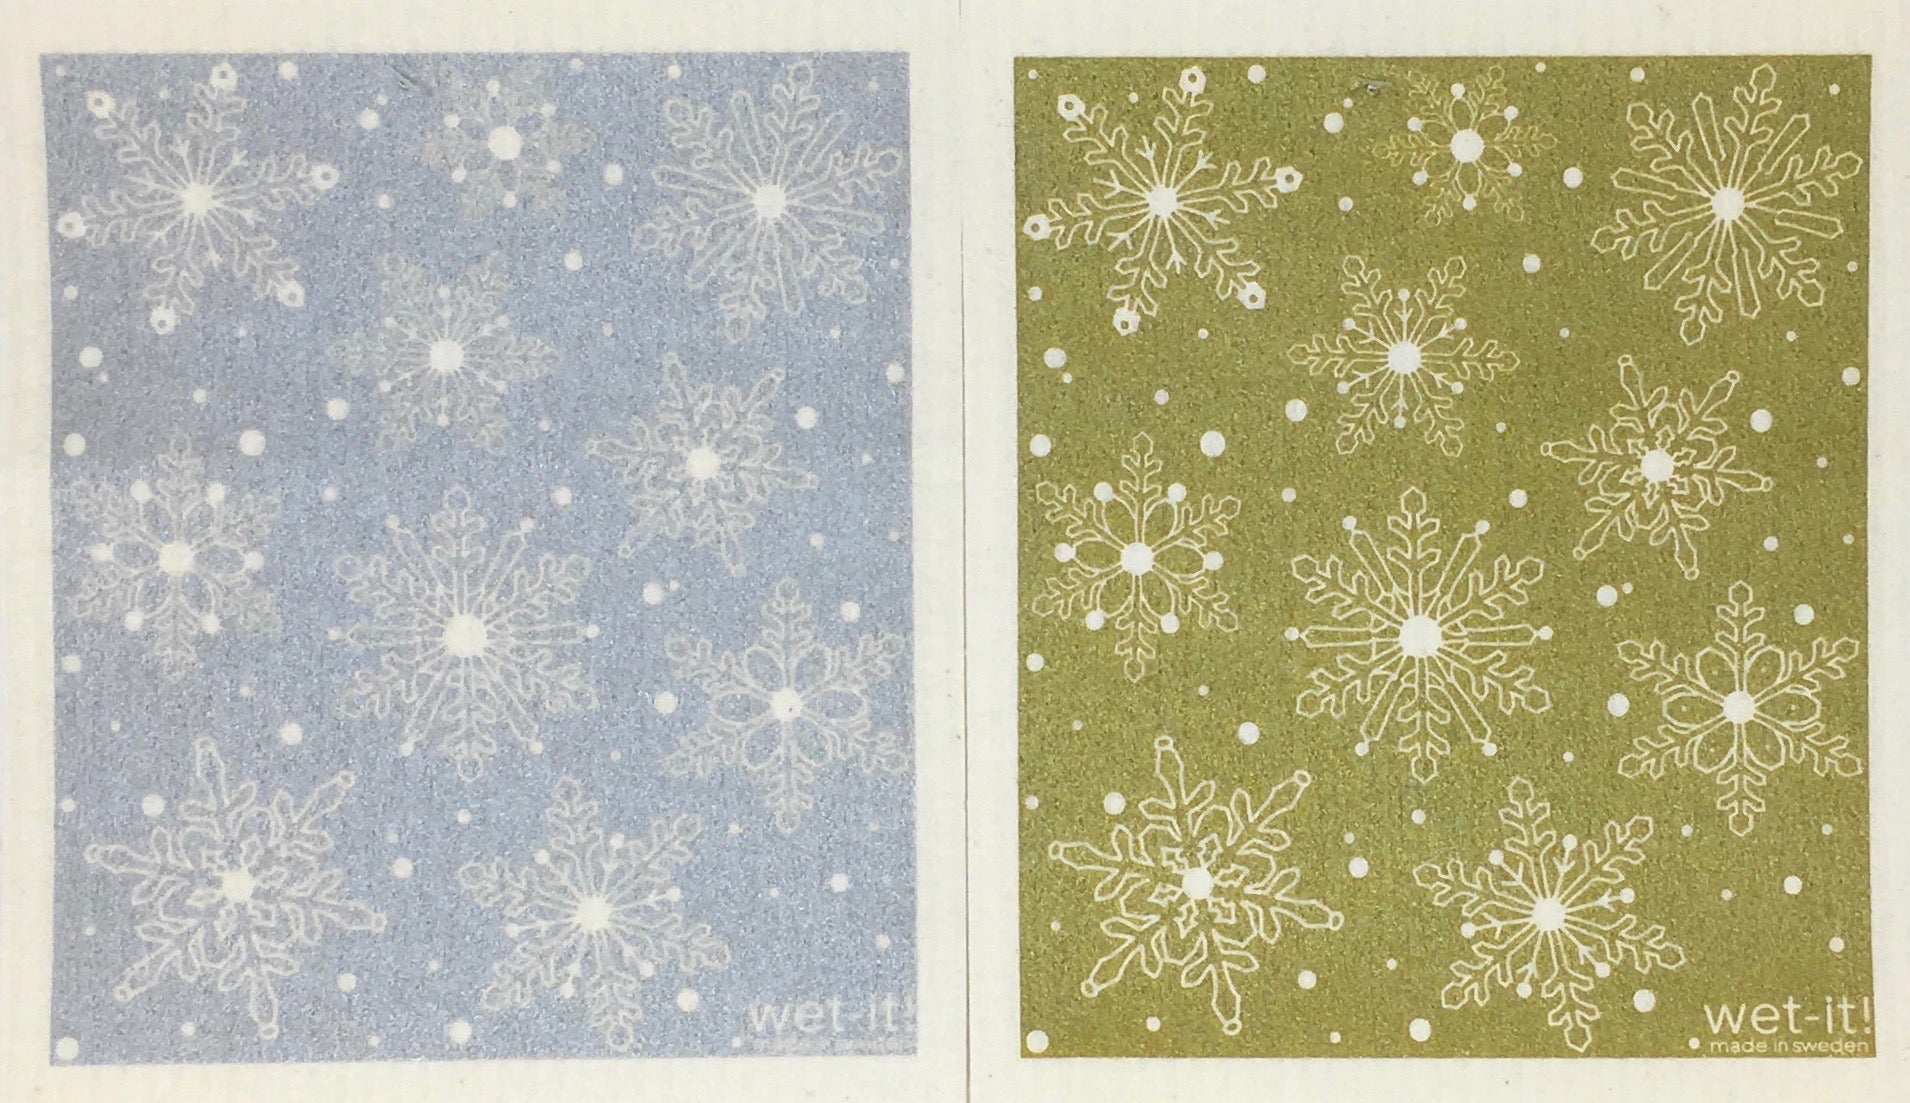 Swedish Treasures Wet-it! Dishcloth & Cleaning Cloth - 2 pack - Winter Snow Silver / Winter Snow Gold